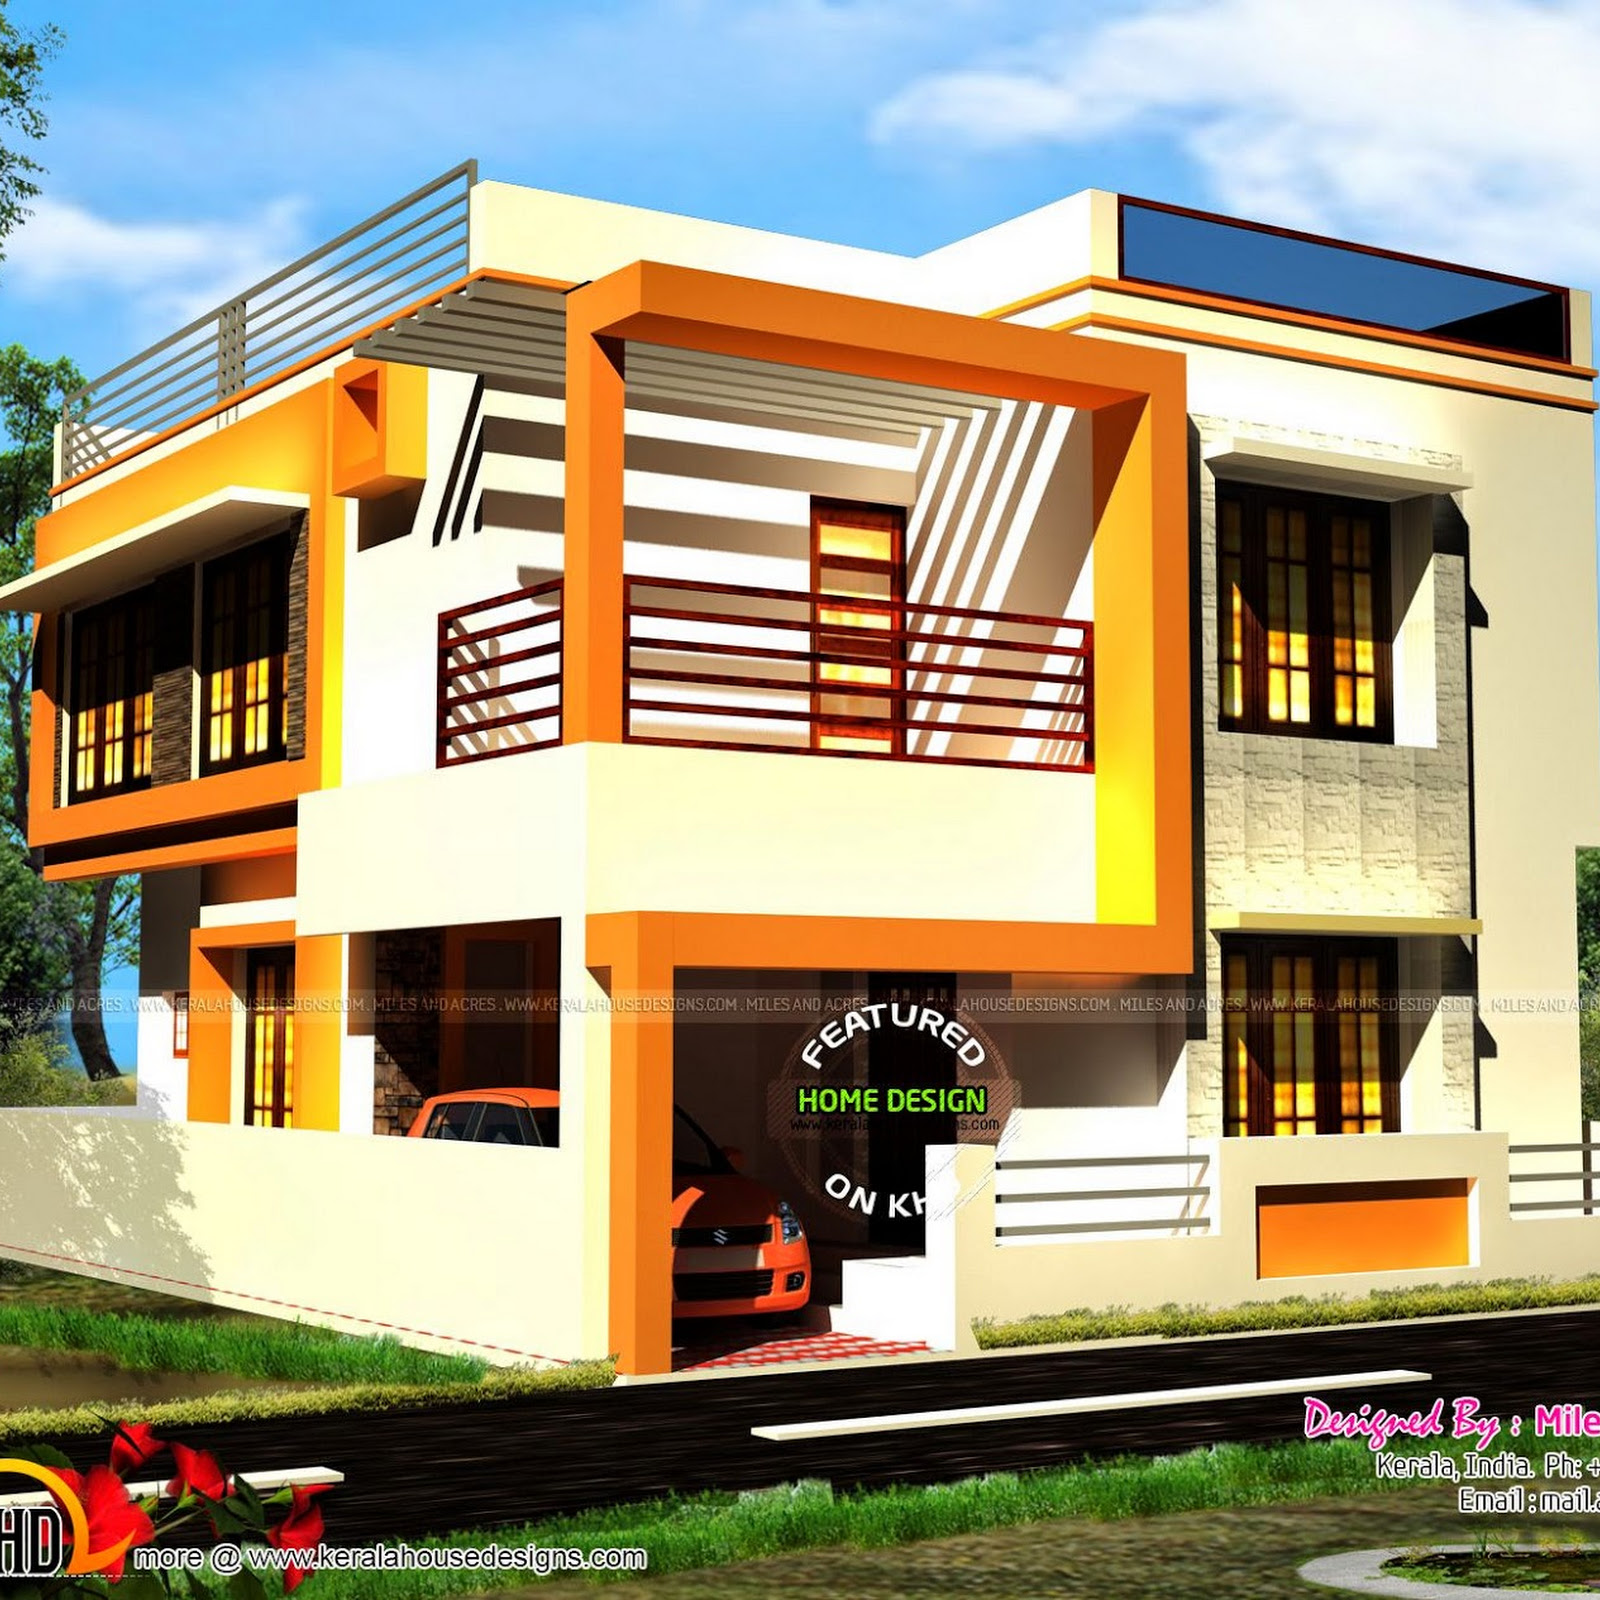 House exterior designs in contemporary style keralahousedesigns